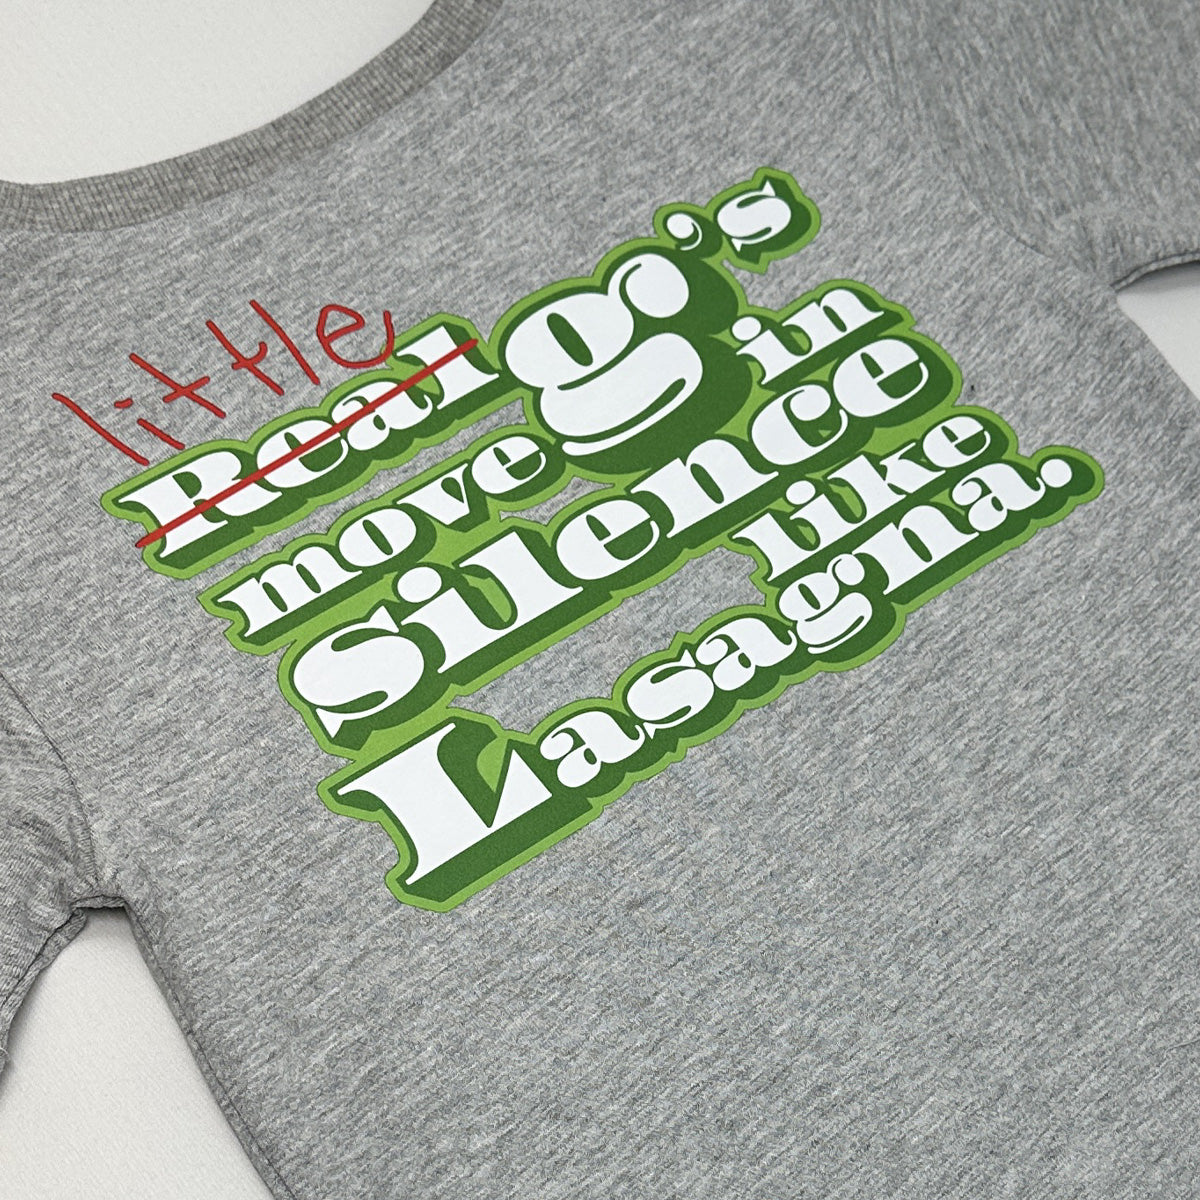 Lil G's Move In Silence T-Shirt (Heather)